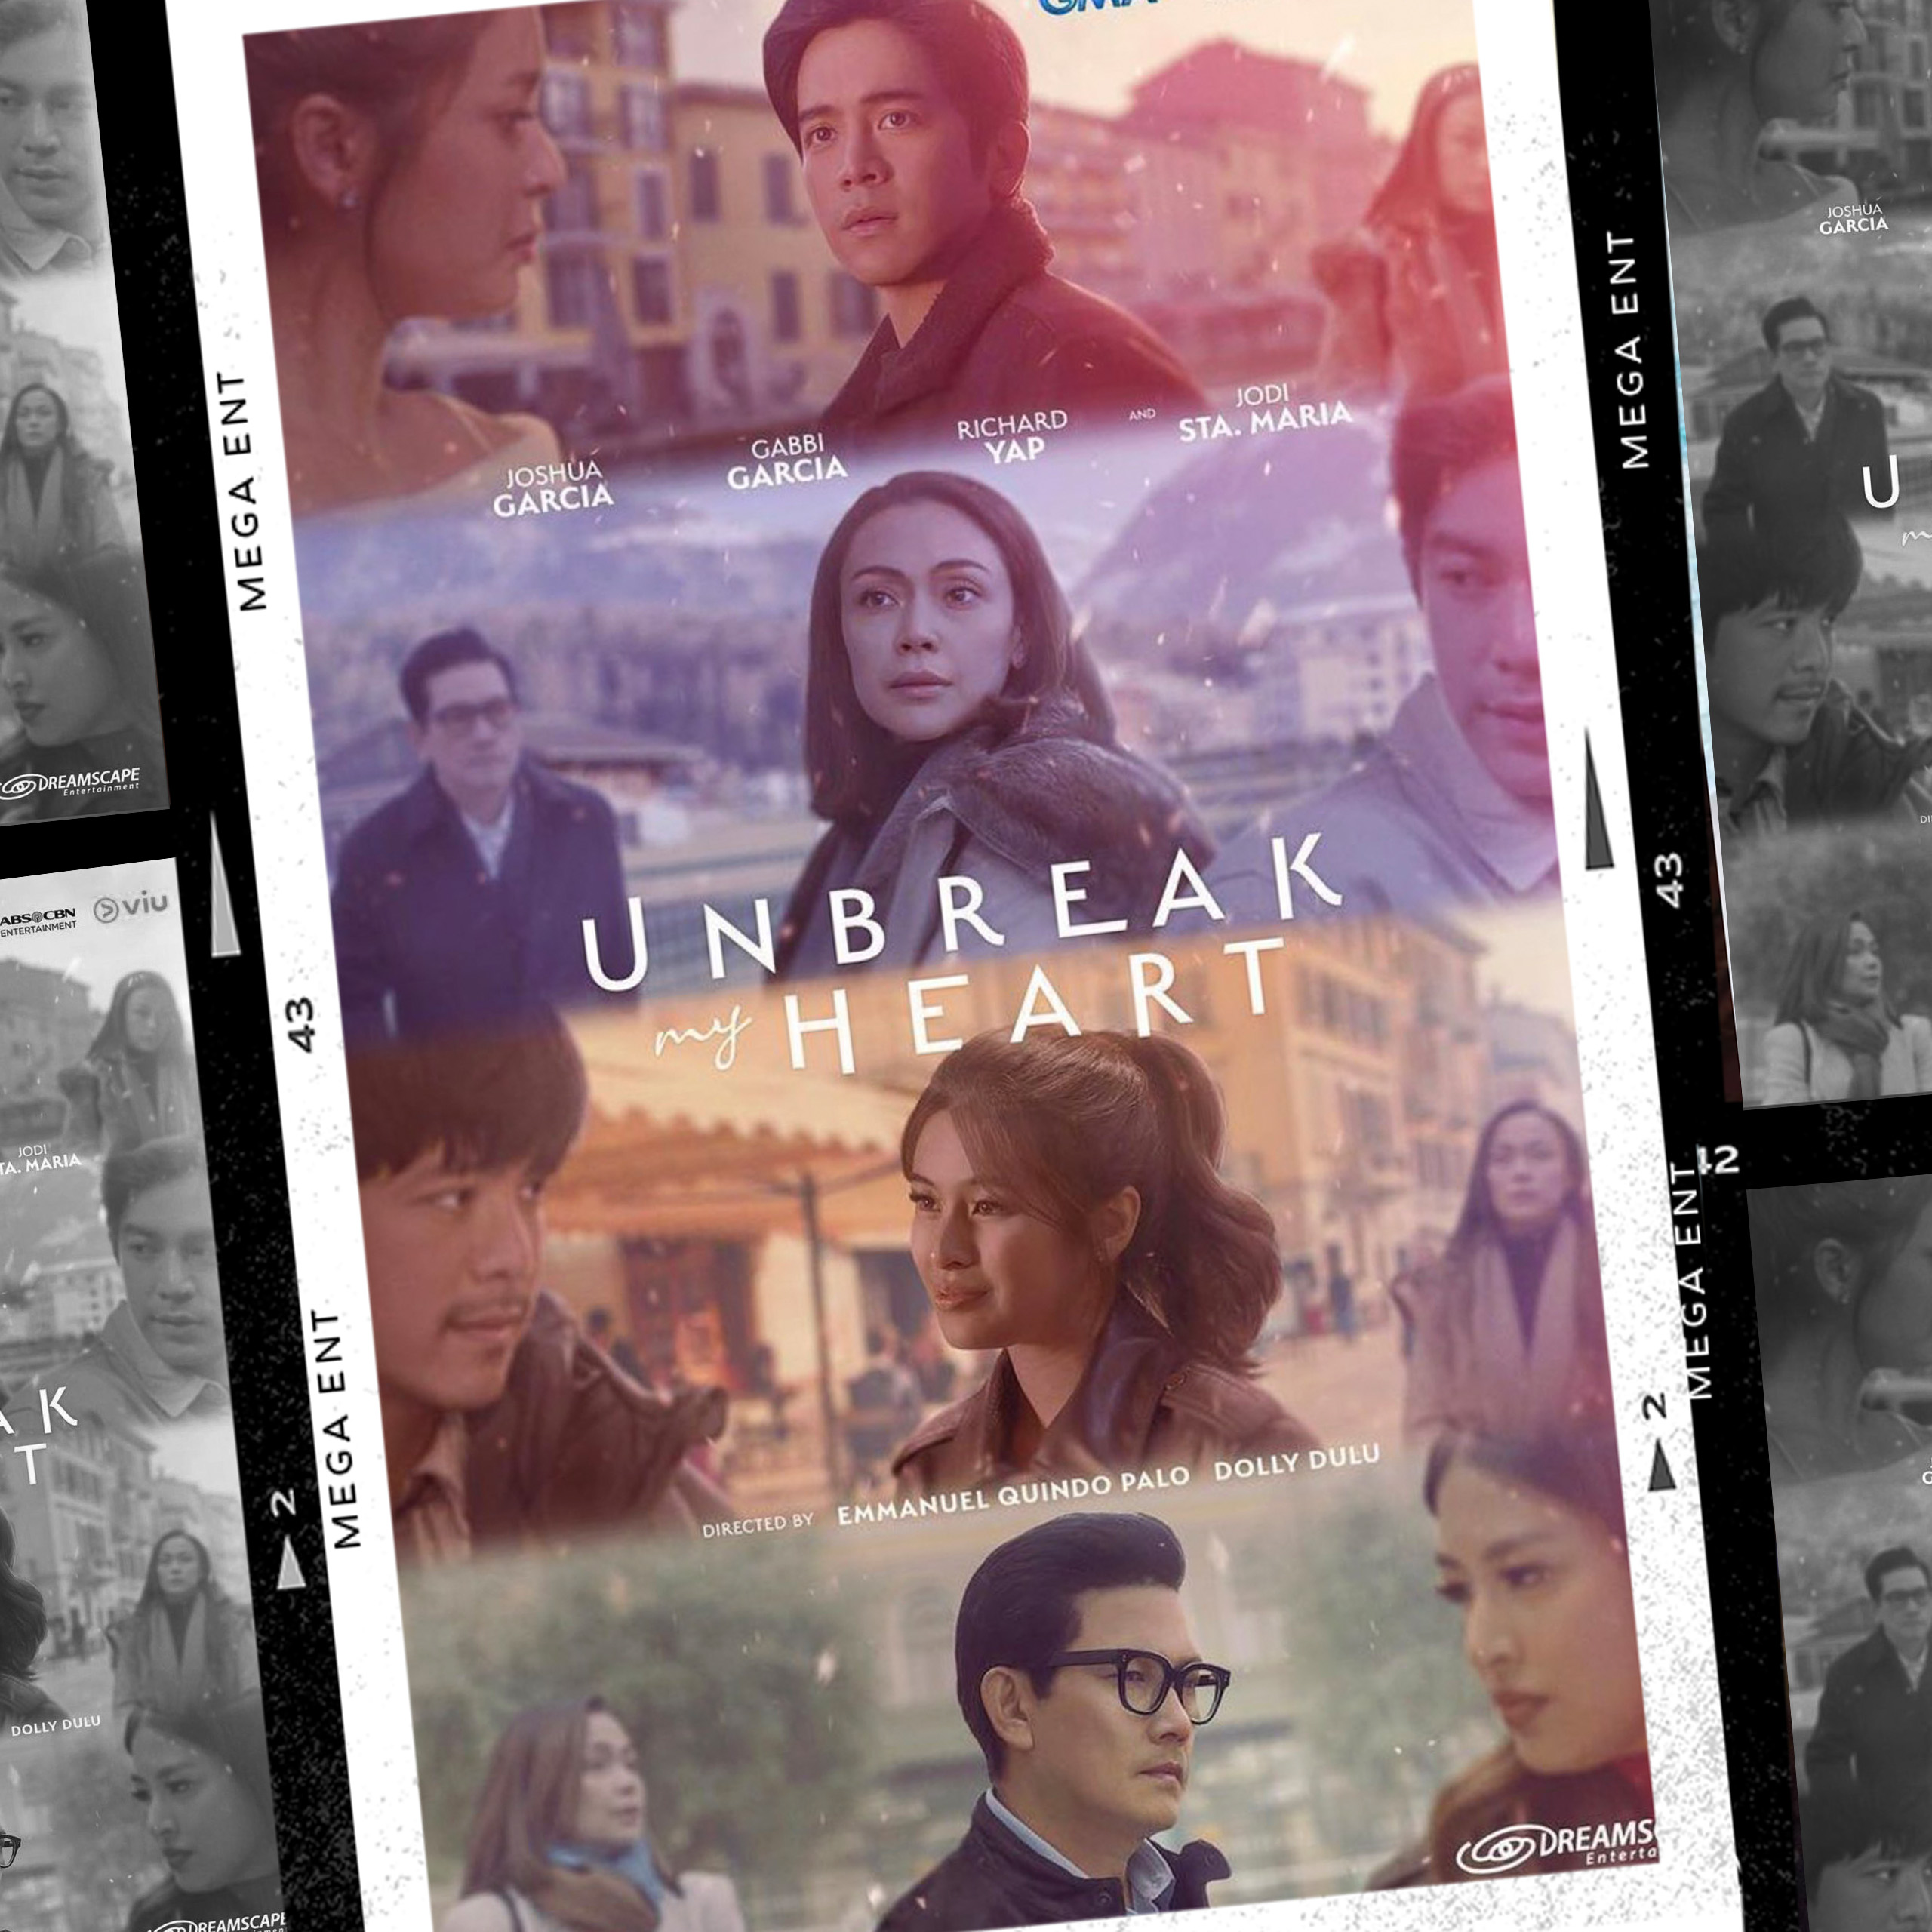 Unbreak My Heart Challenges Choice and Fate in Its Pilot Week